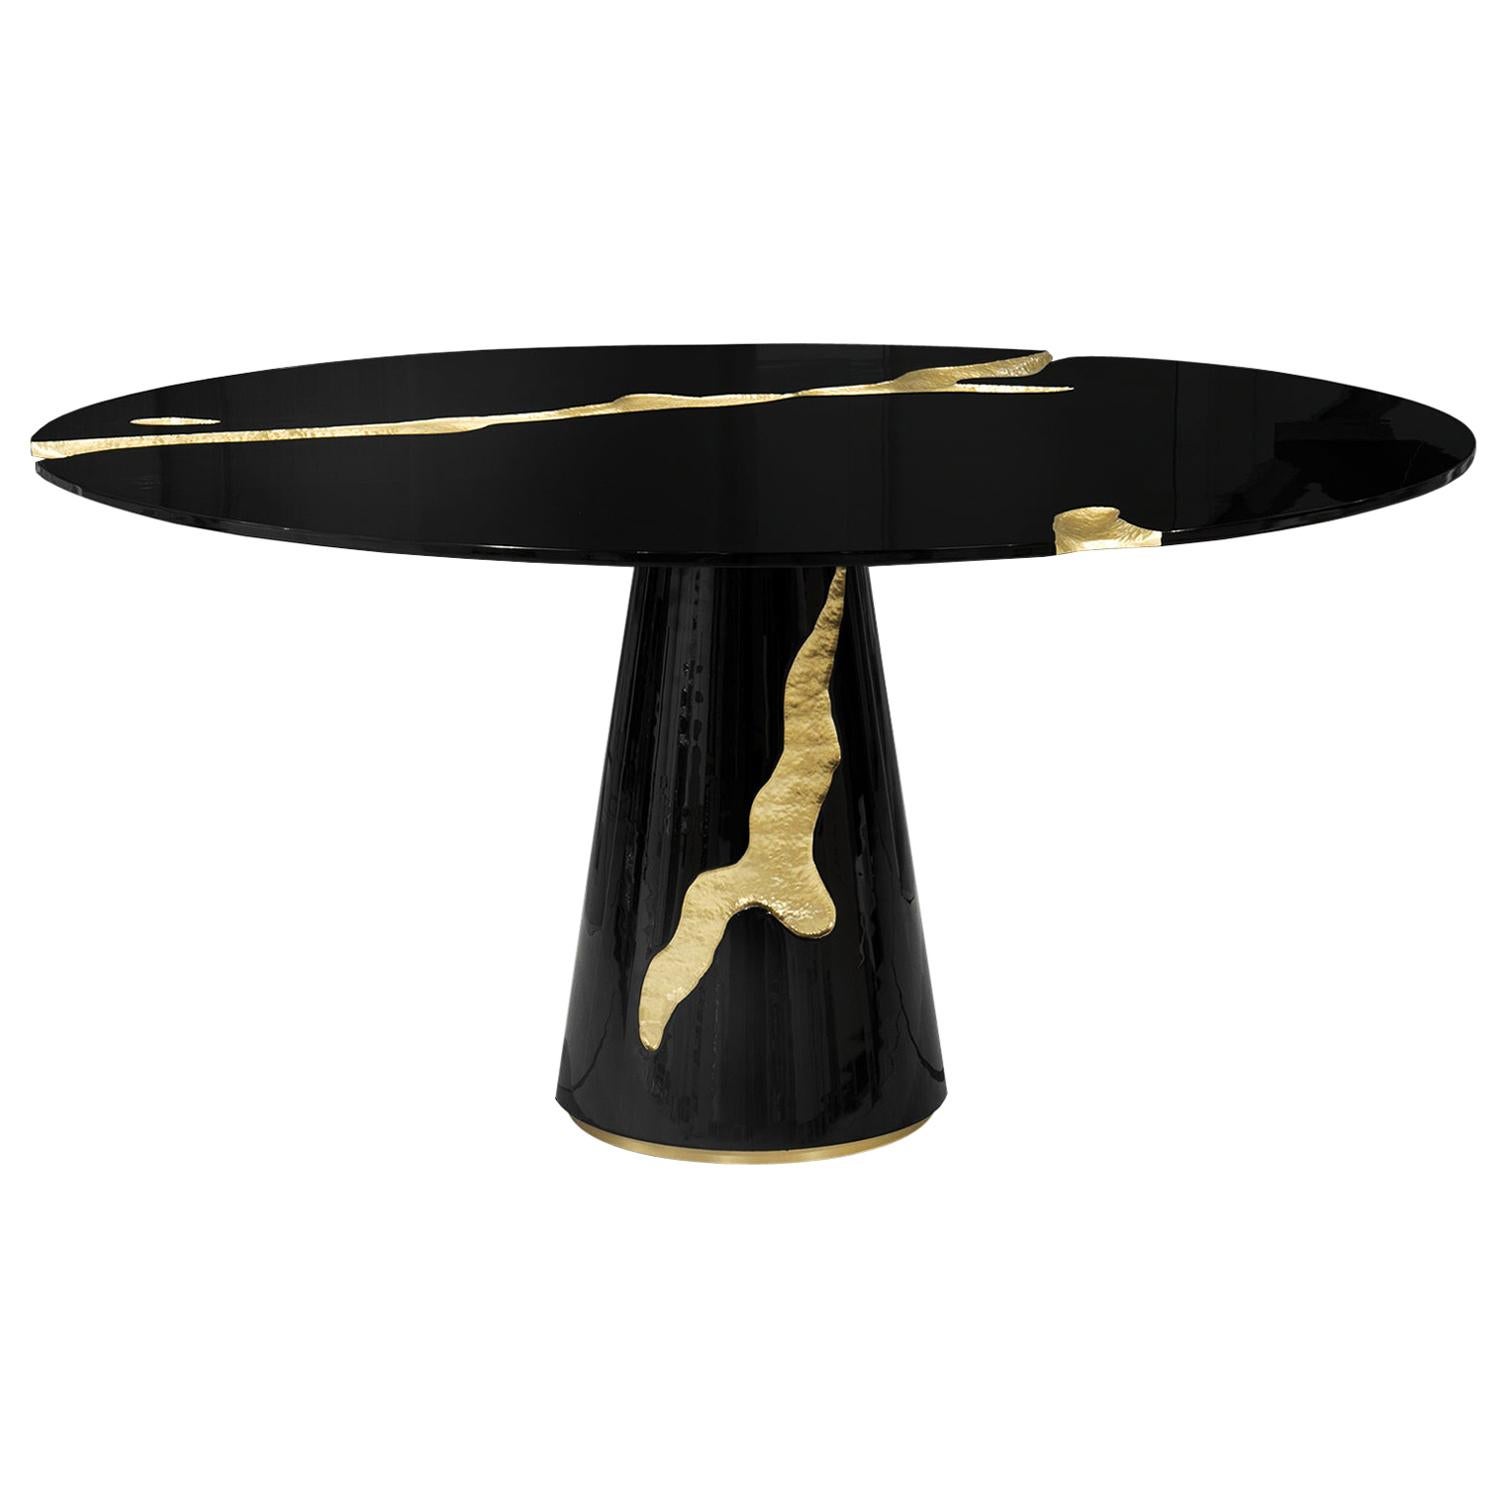 Majestic Round Black Dining Table